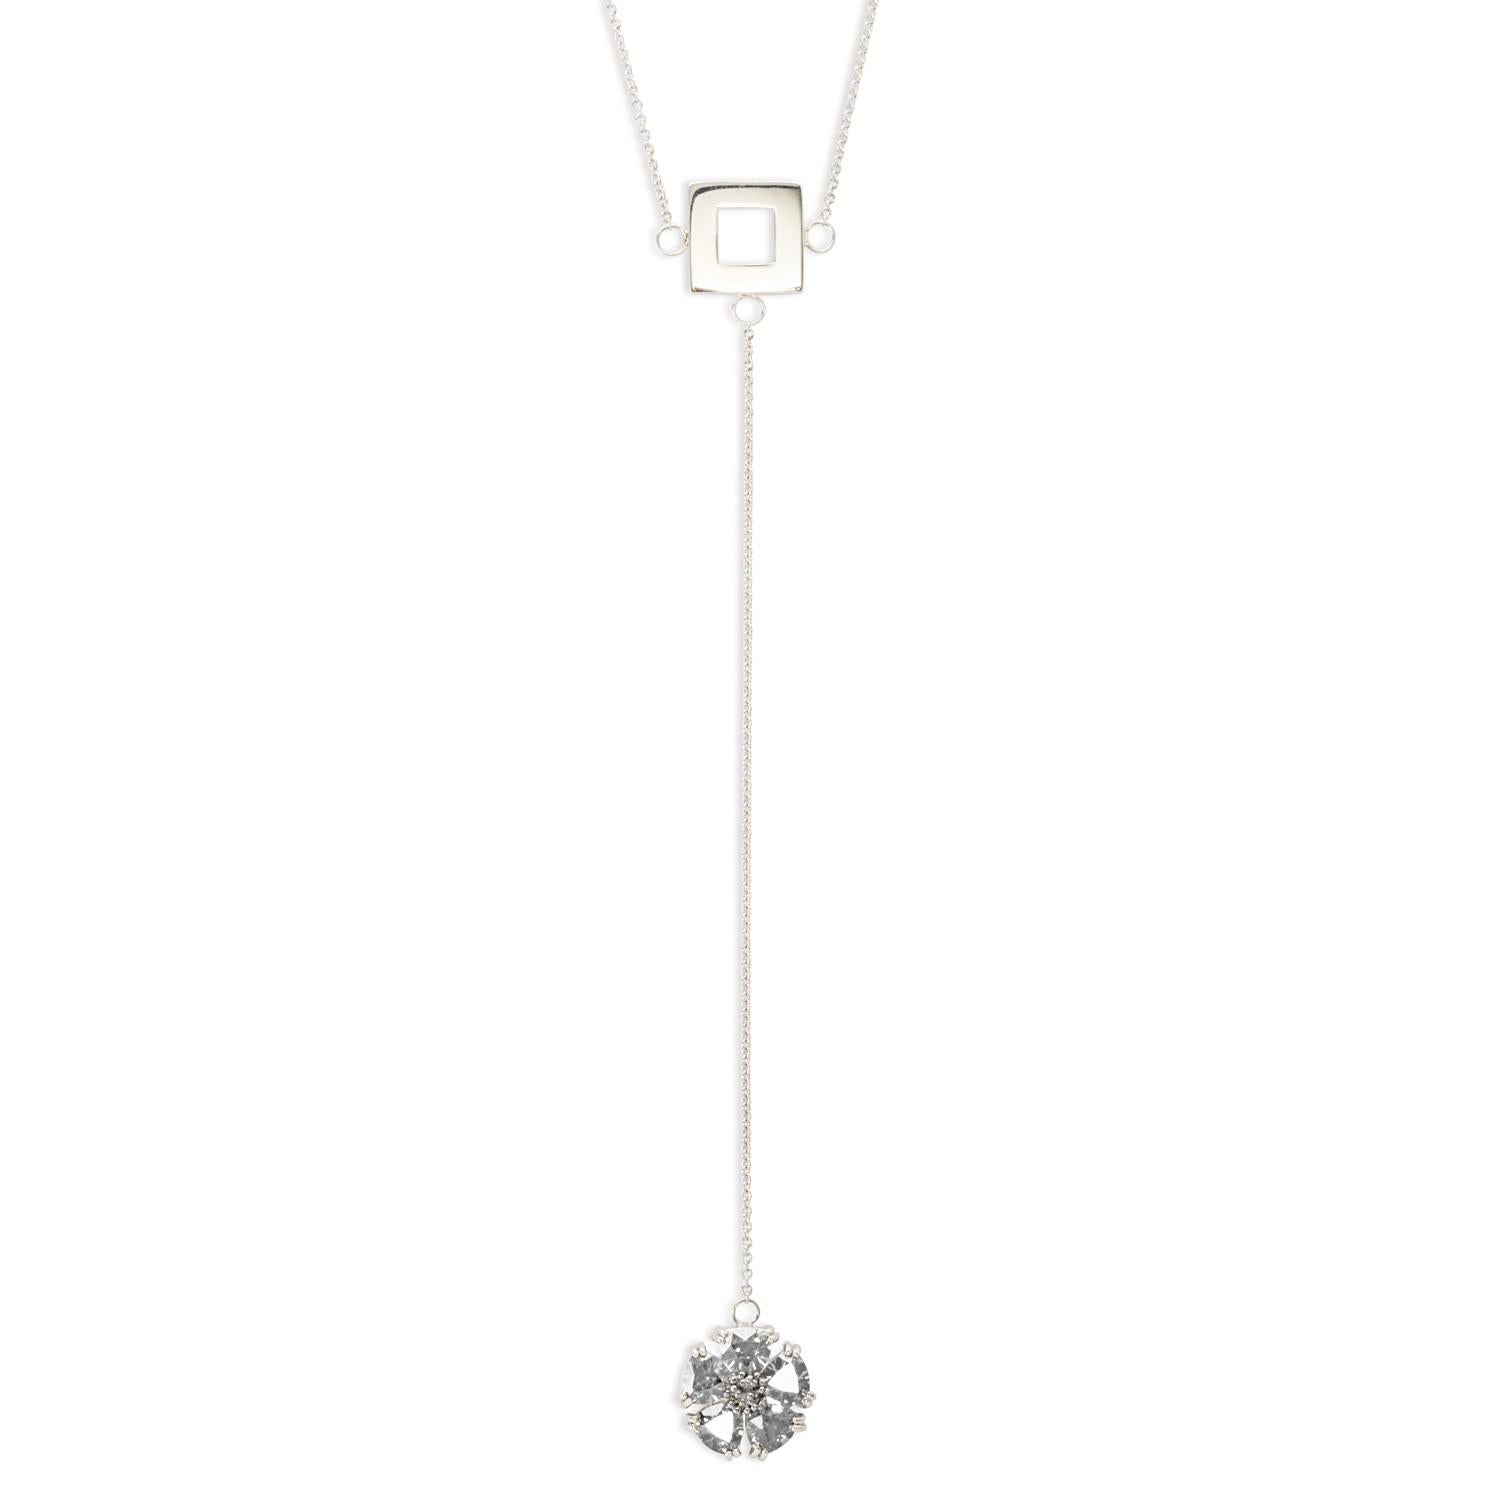 Designed in NYC

.925 Sterling Silver 5 x 7 mm Black Sapphire Blossom Stone and Square Lariat Necklace. No matter the season, allow natural beauty to surround you wherever you go. Blossom stone and square lariat necklace: 

Sterling silver